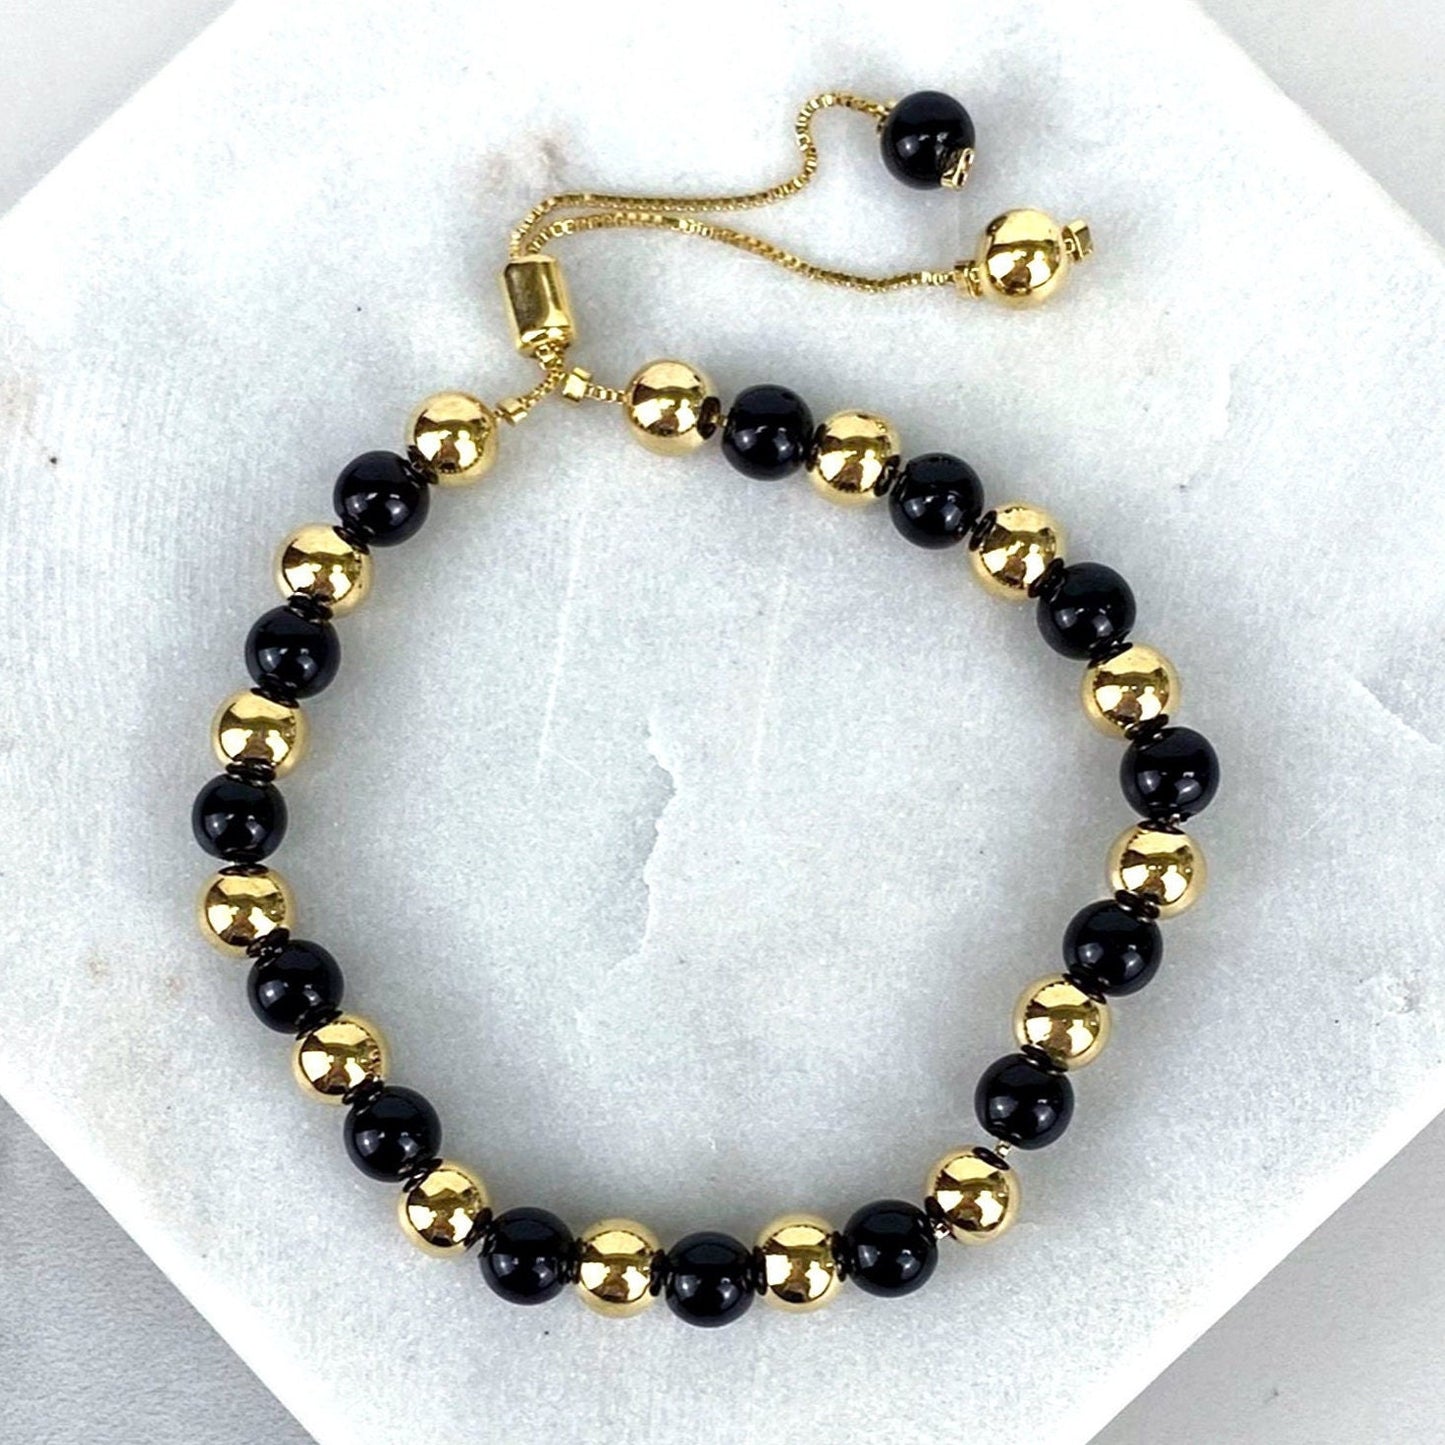 18k Gold Filled 1mm Box Chain Bracelet Featuring Simulated Onyx Black Bead Ball, Gold Beads, Adjustable Bracelet Wholesale Jewelry Supplies